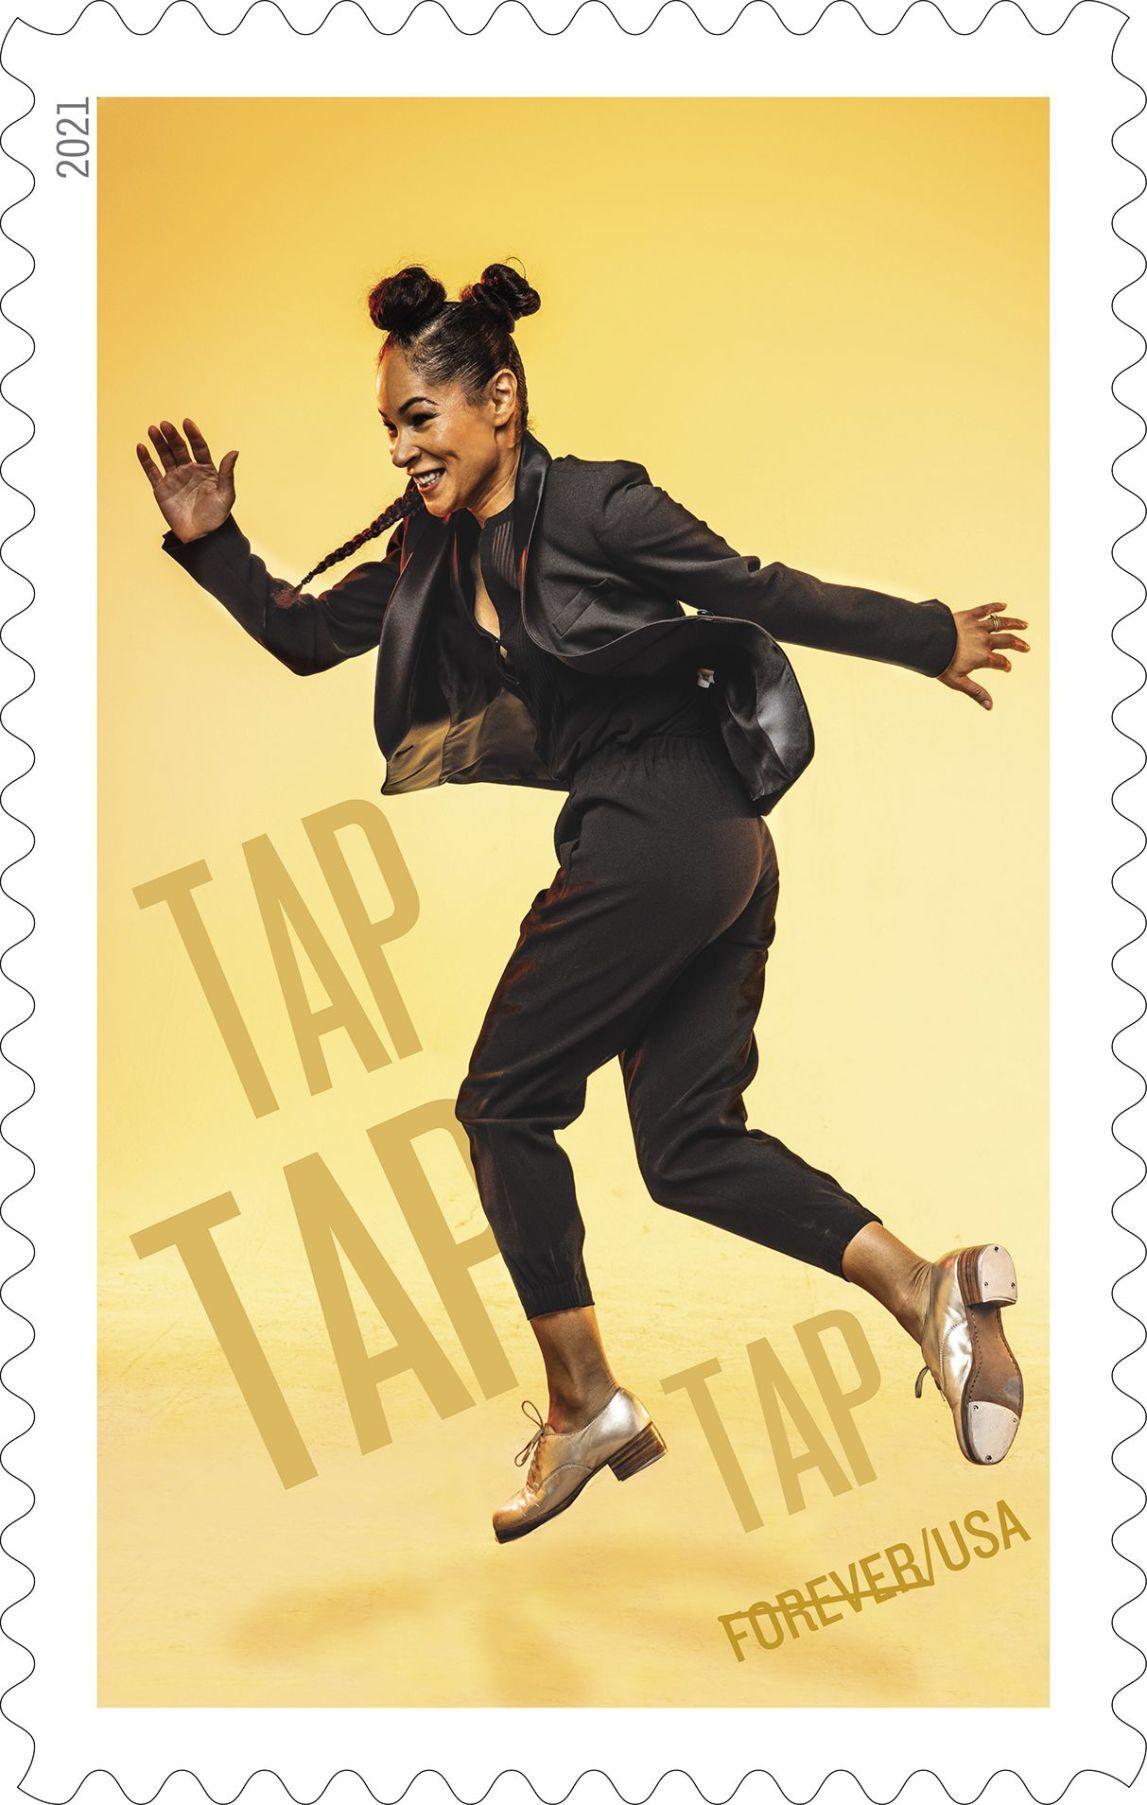 Dancer tapped to appear on postage stamp | Lifestyle | phillytrib.com